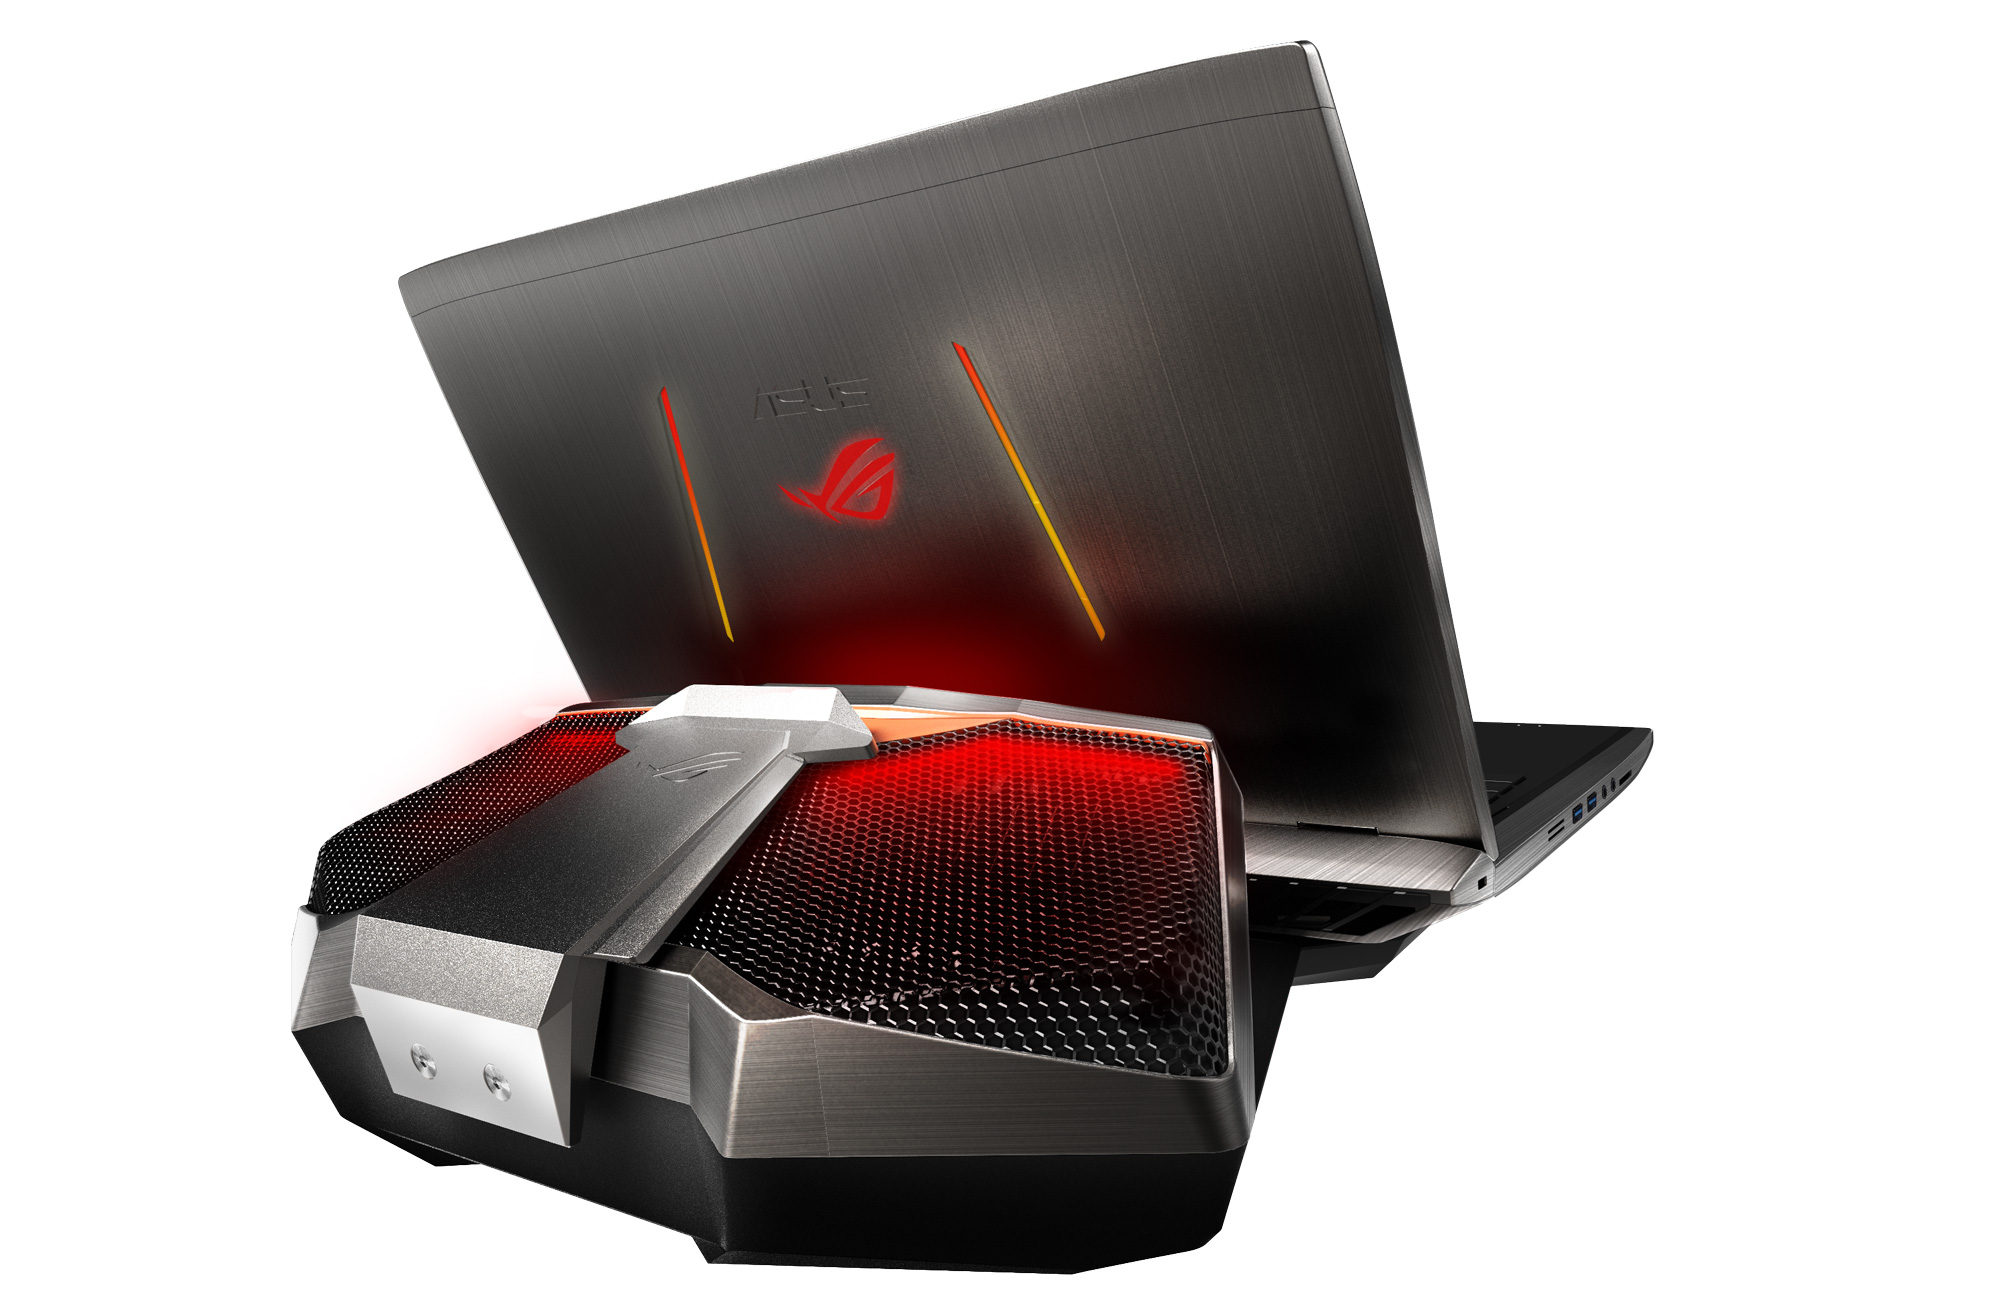 ASUS ROG unveils new lineup at IFA 2015 33